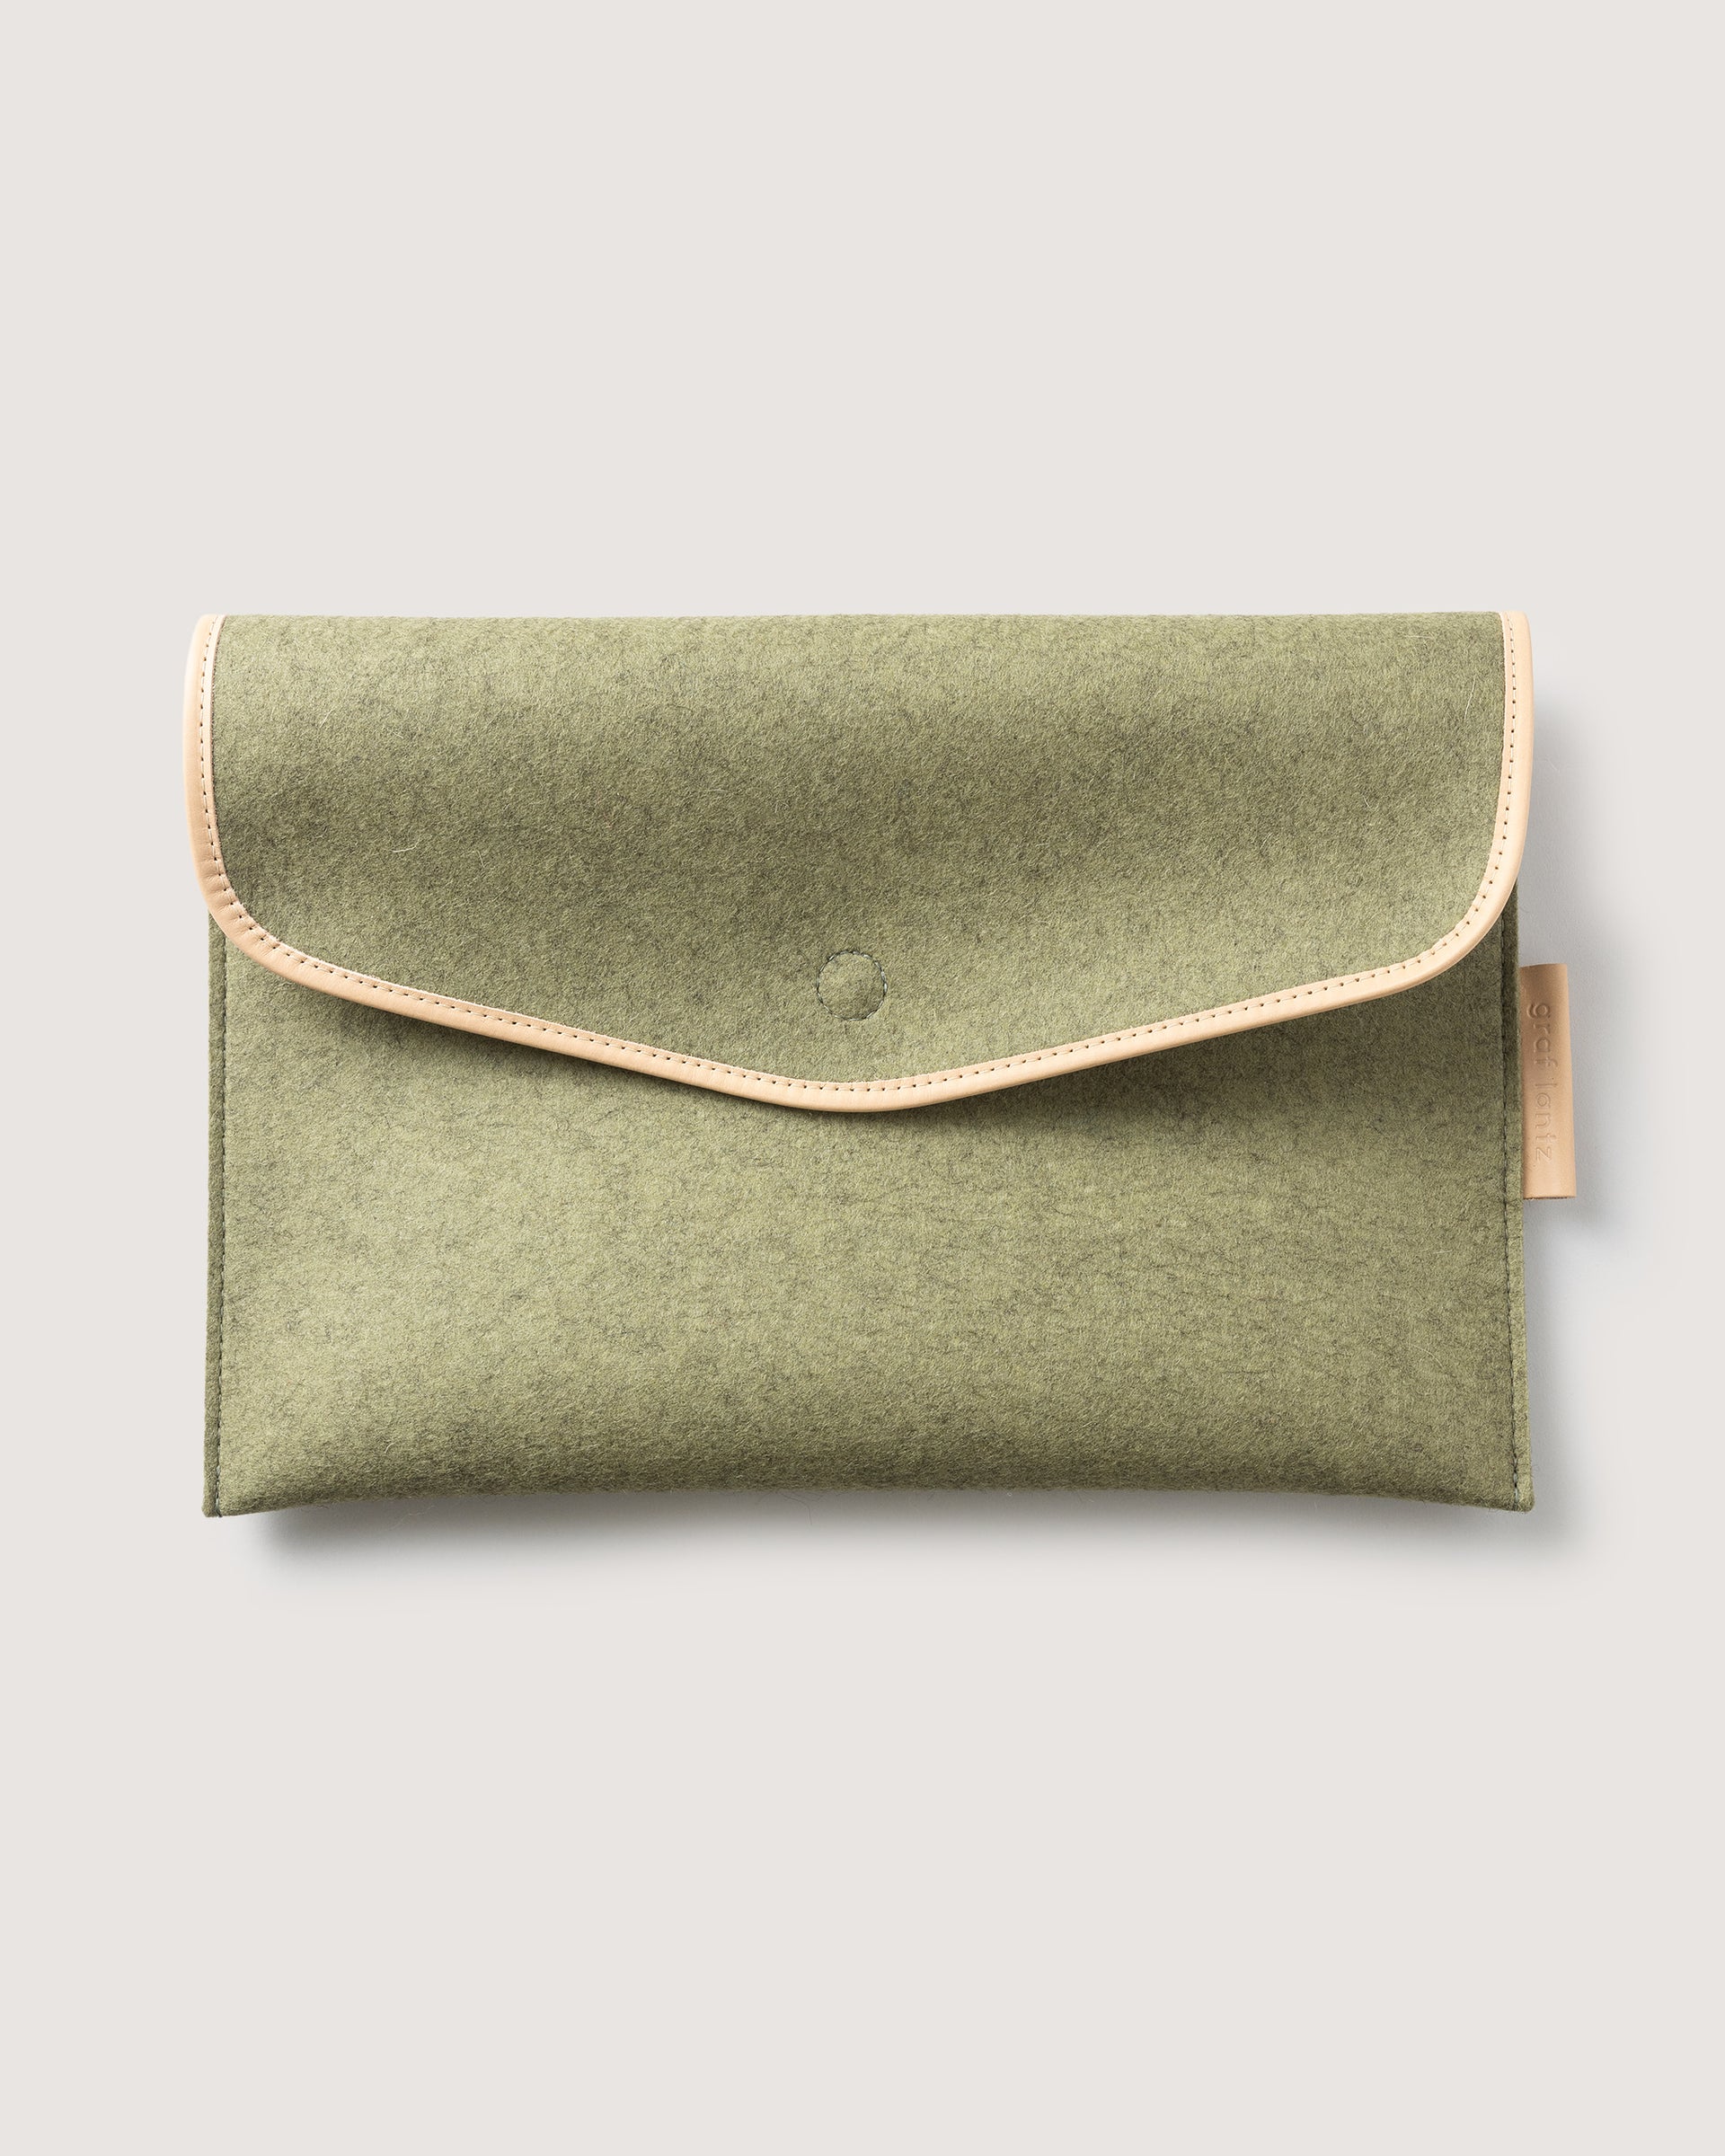 Our elegant 16 inch laptop sleeve. Here in sage color